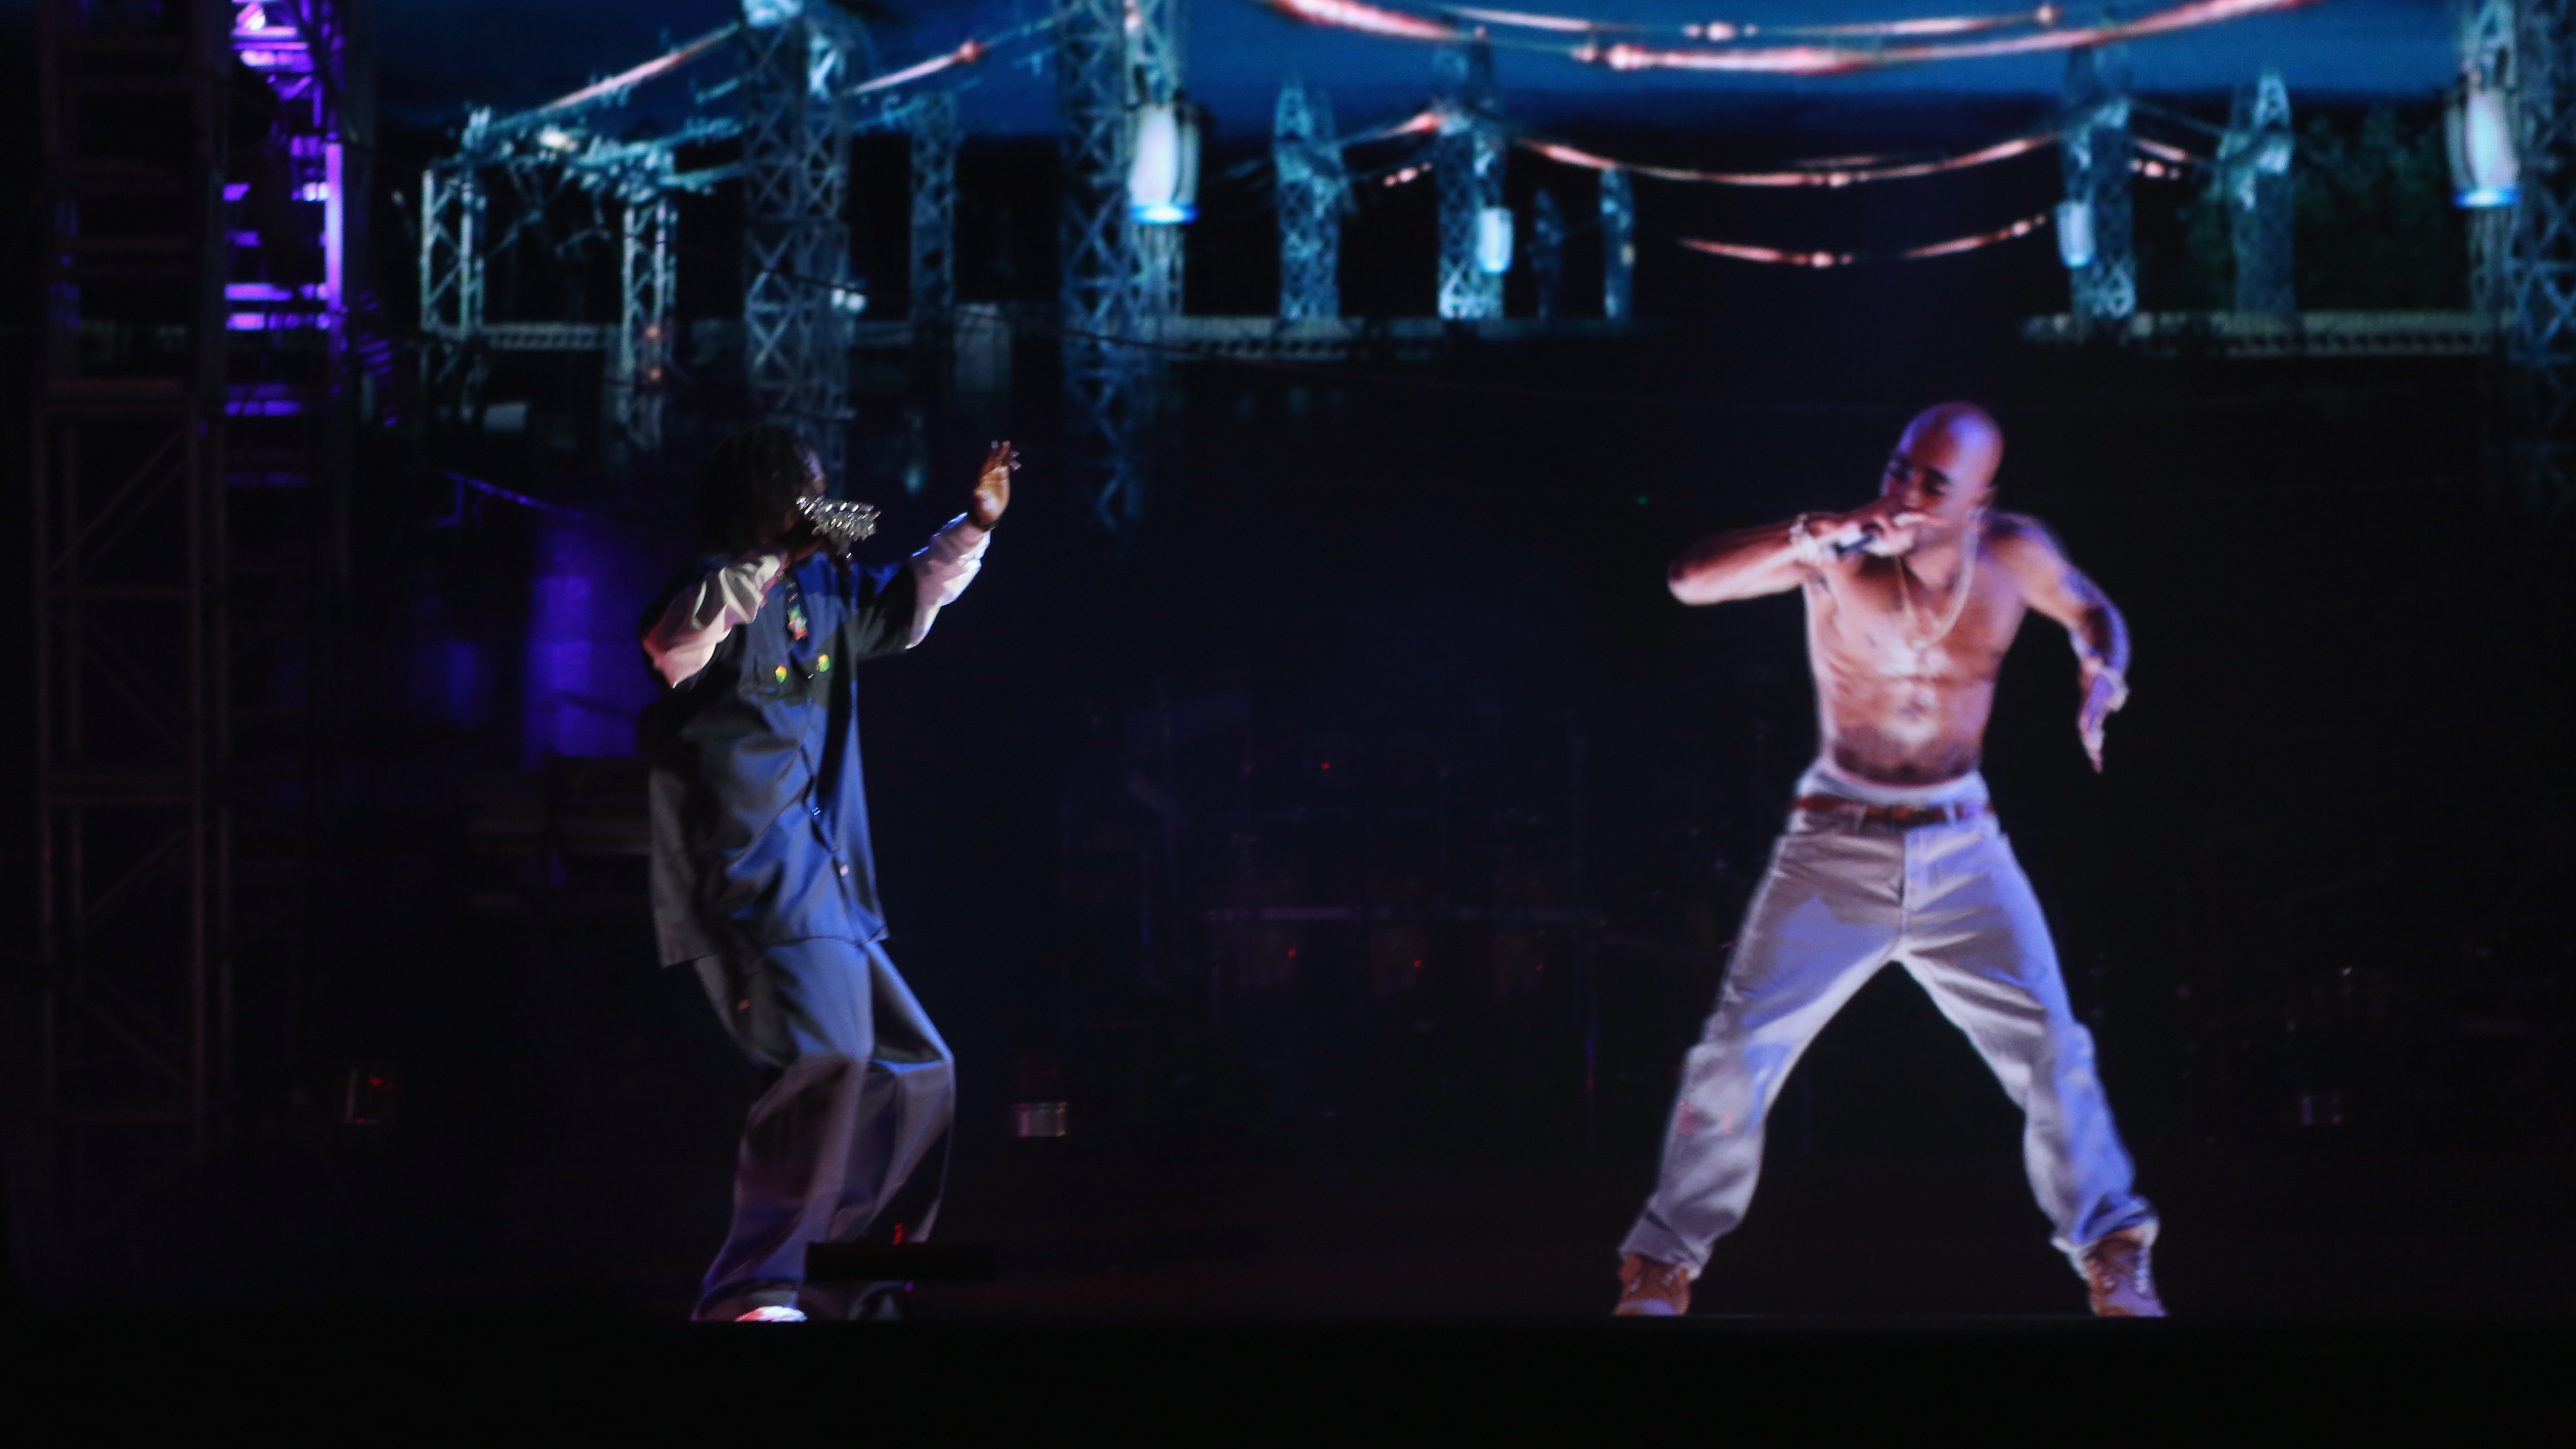 Snoop Dogg and a hologram of Tupac Shakur perform on stage at Coachella